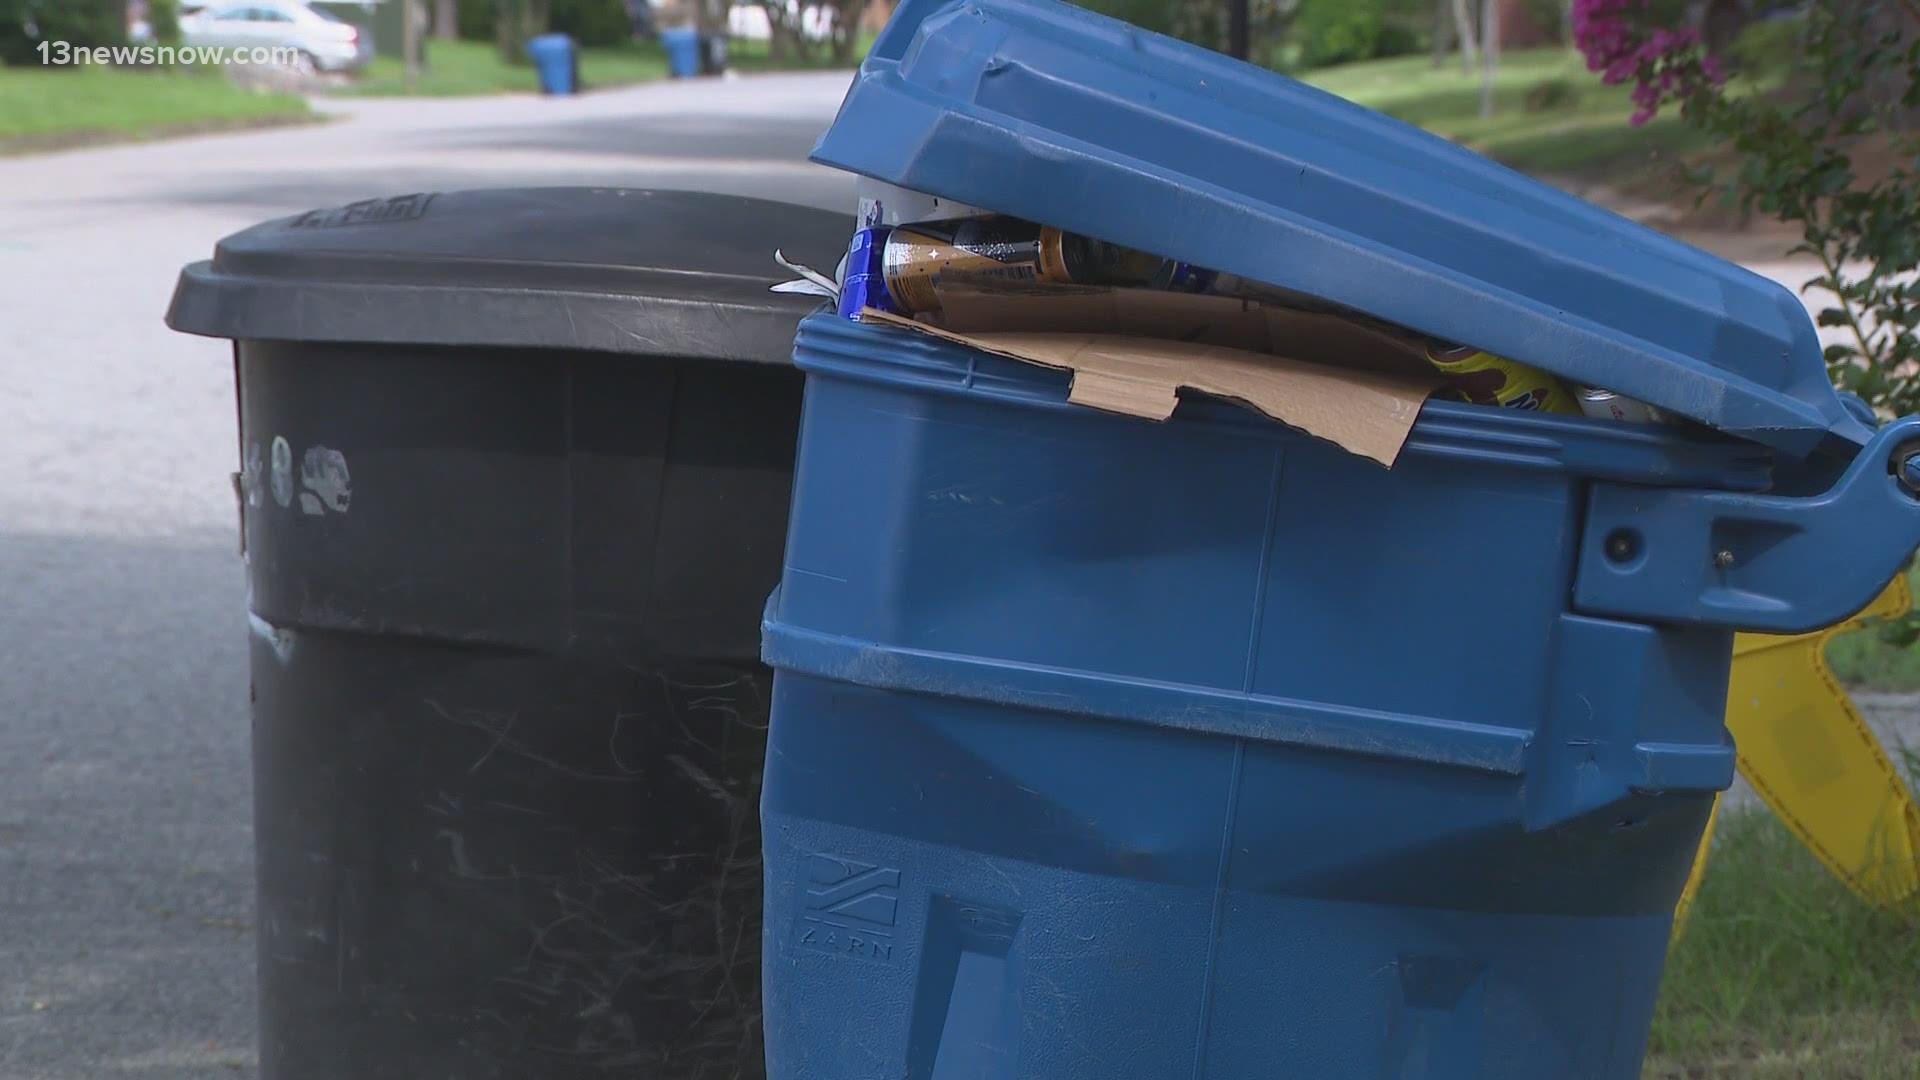 Delays in drivers picking up your trash and recycling bins is becoming a common trend in Hampton Roads and the problem is now hitting the city of Newport News.